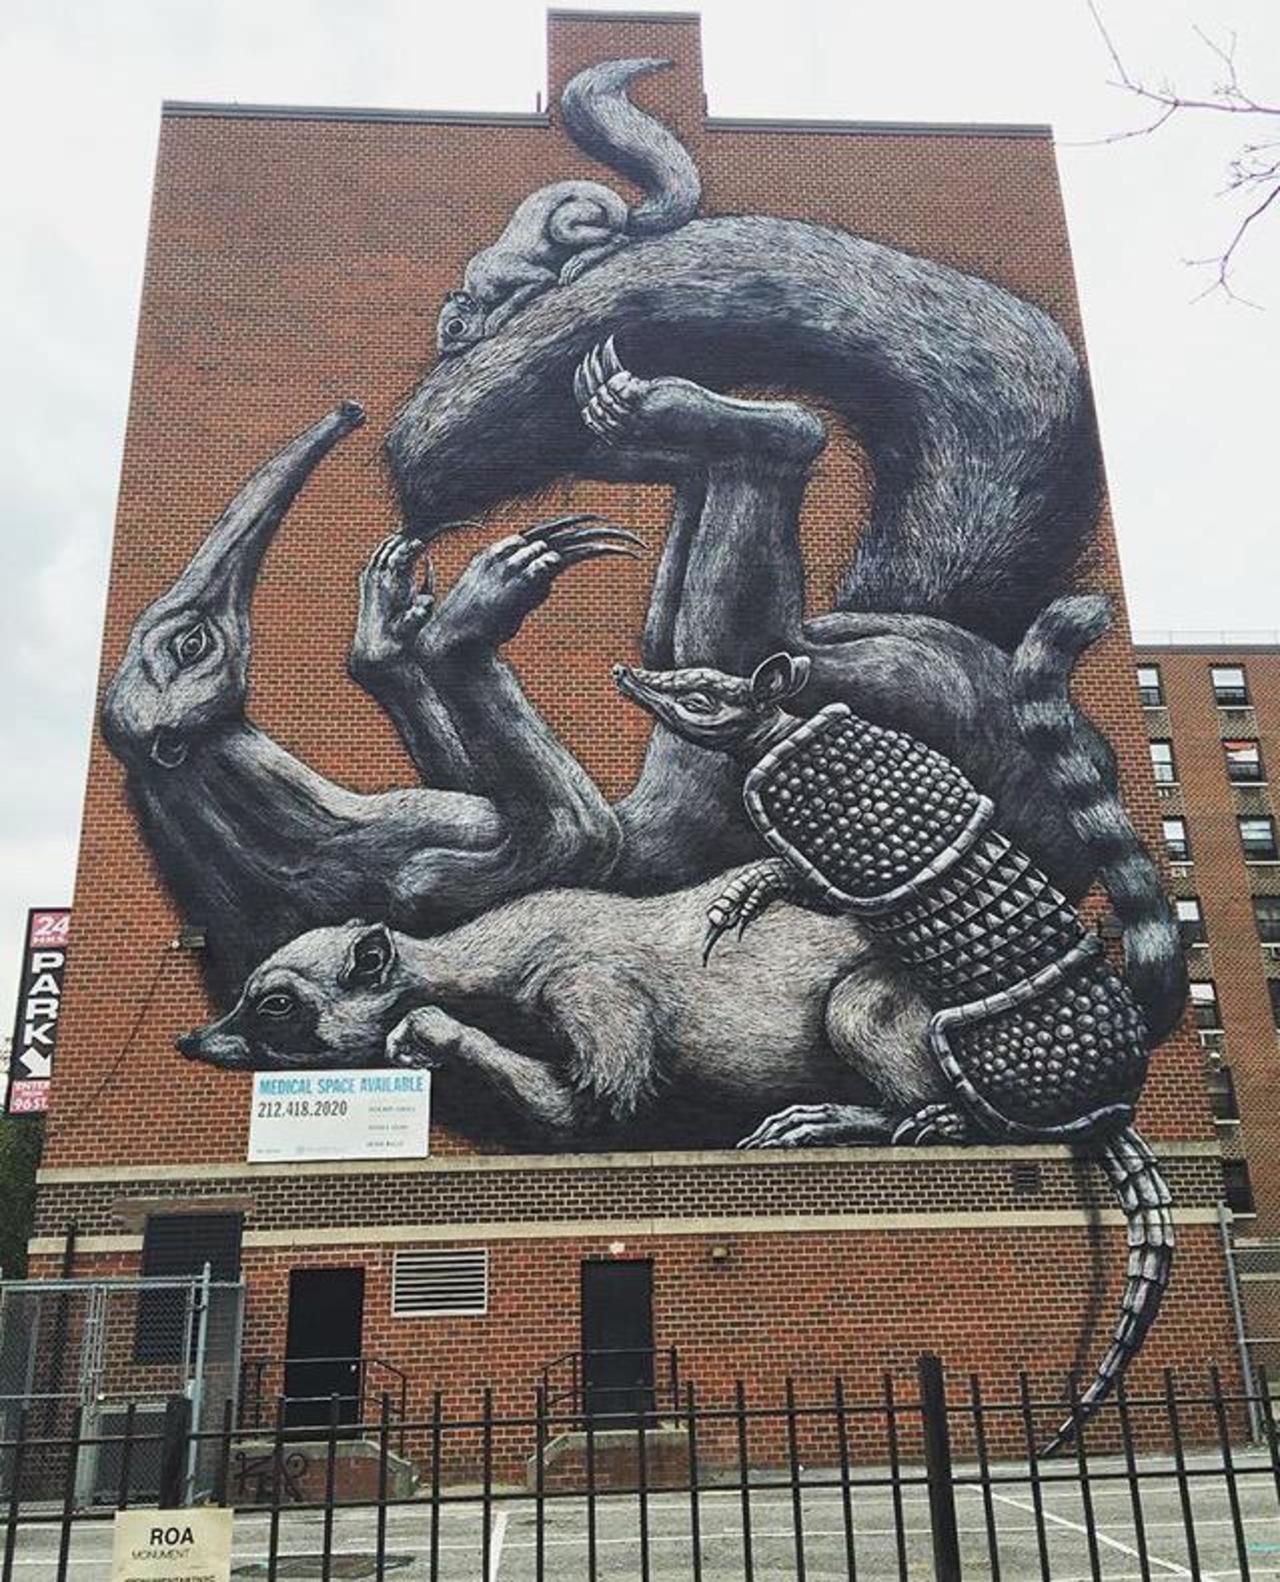 The completed new large scale Street Art wall by ROA in NYC

#art #graffiti #mural #streetart http://t.co/J8ZDWZzvYS